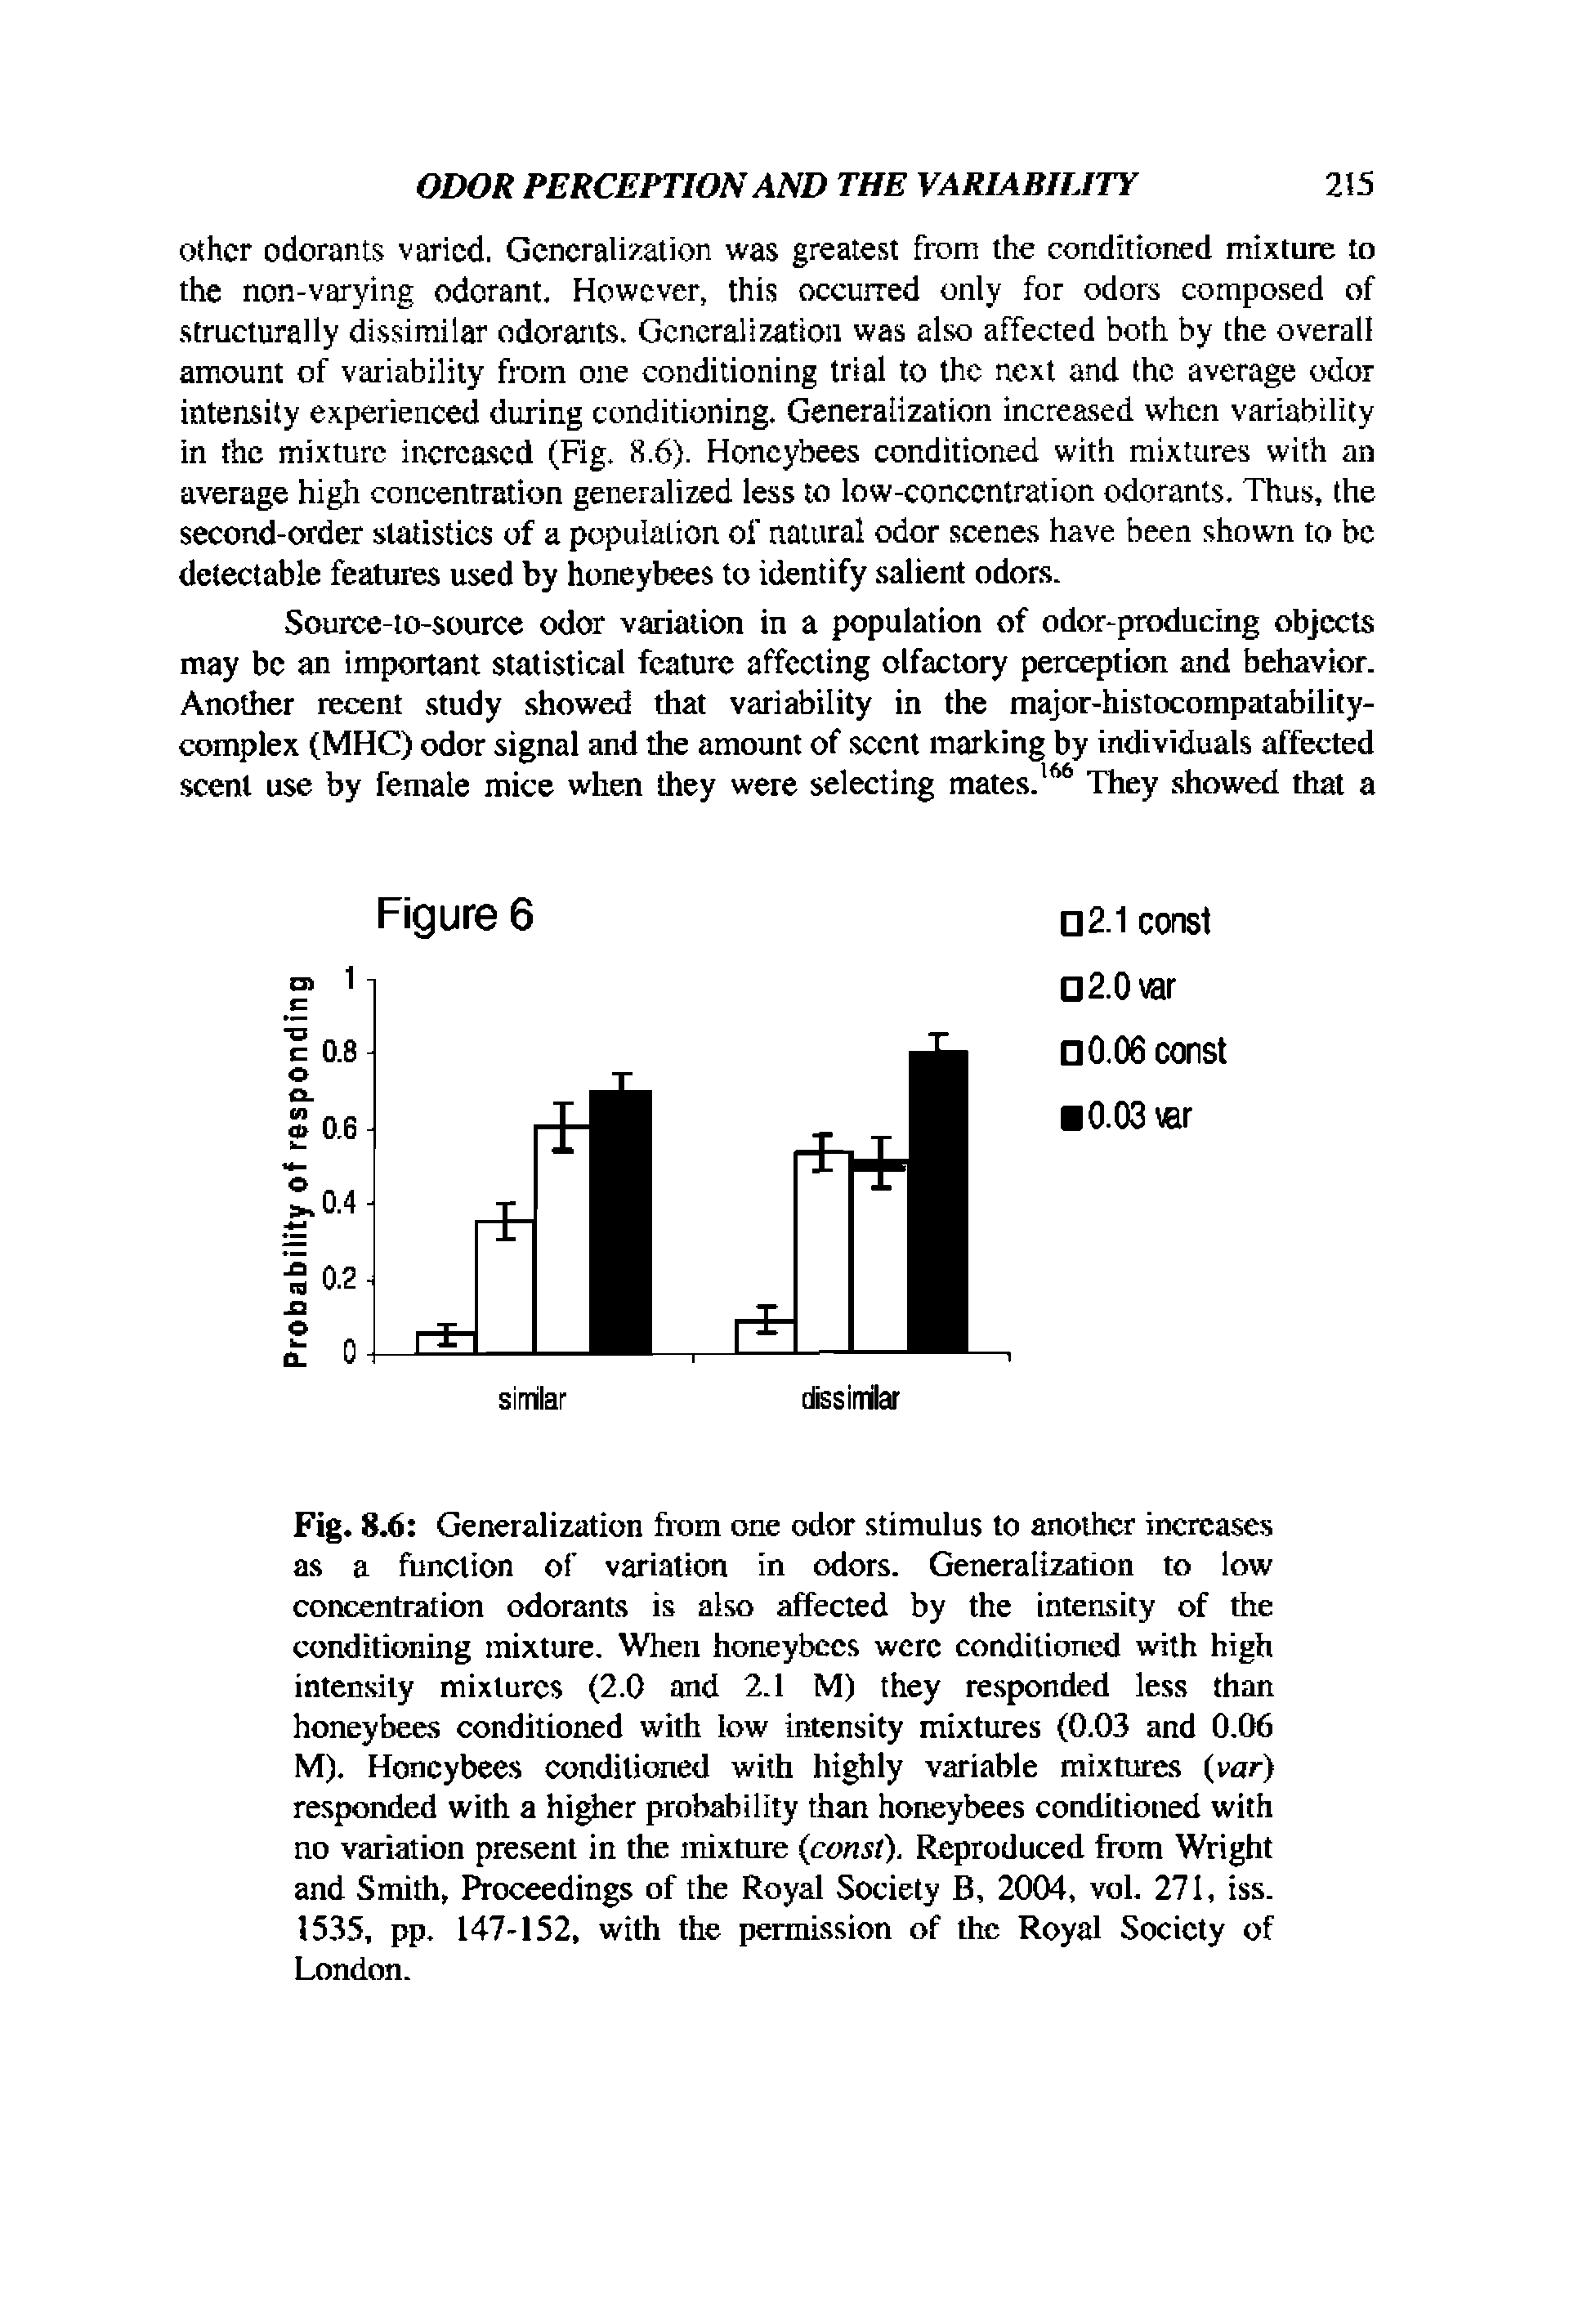 Fig. 8.6 Generalization from one odor stimulus to another increases as a function of variation in odors. Generalization to low concentration odorants is also affected by the intensity of the conditioning mixture. When honeybees were conditioned with high intensity mixtures (2.0 and 2.1 M) they responded less than honeybees conditioned with low intensity mixtures (0.03 and 0.06 M). Honeybees conditioned with highly variable mixtures (var) responded with a higher probability than honeybees conditioned with no variation present in the mixture (const). Reproduced from Wright and Smith, Ihoceedings of the Royal Society B, 2004, vol. 271, iss. 1535, pp. 147-152, with the permission of the Royal Society of London.